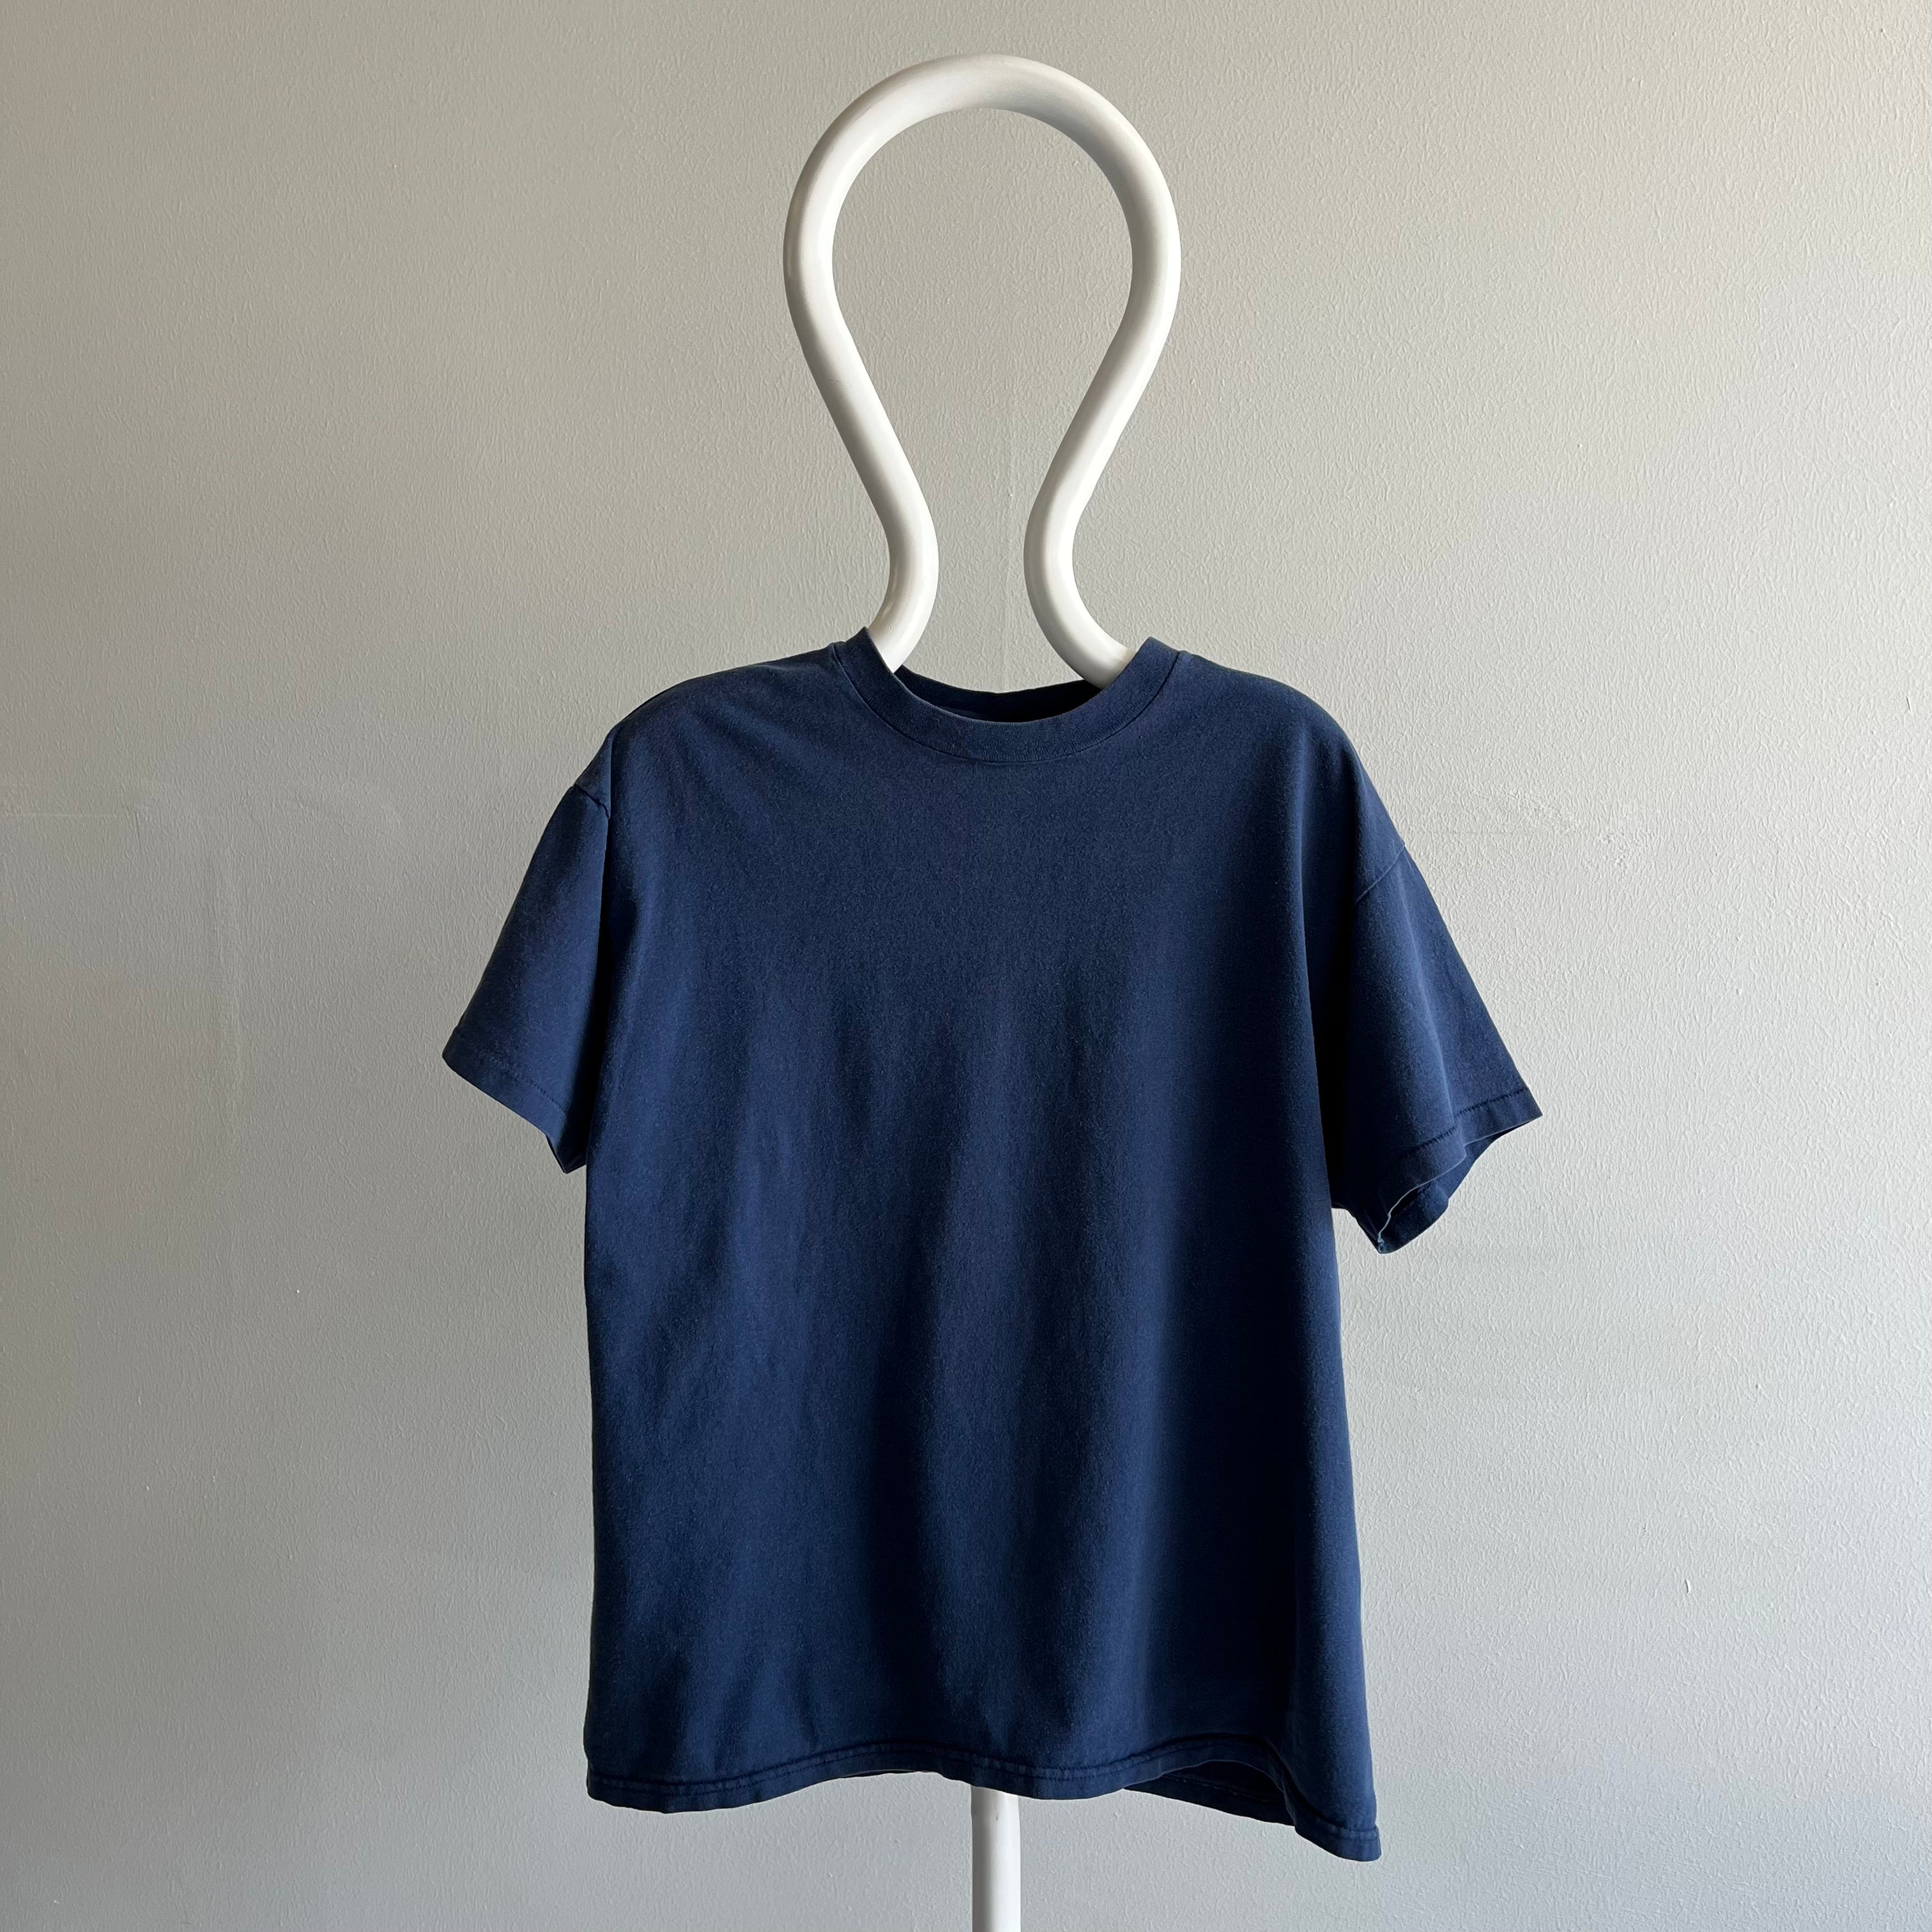 1990s Faded Blank Navy Cotton T-shirt by Hanes